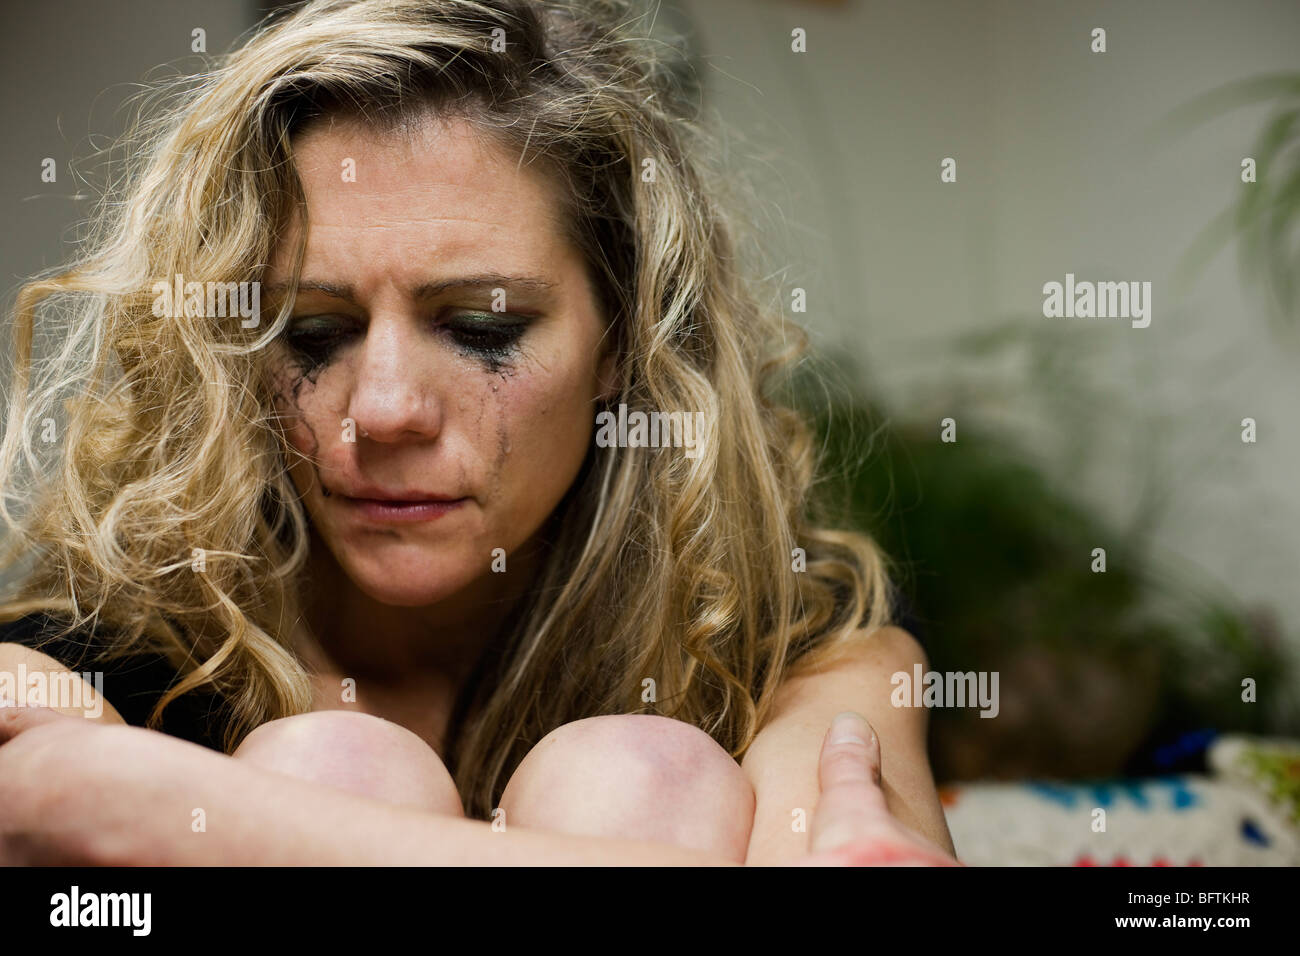 woman upset and crying Stock Photo